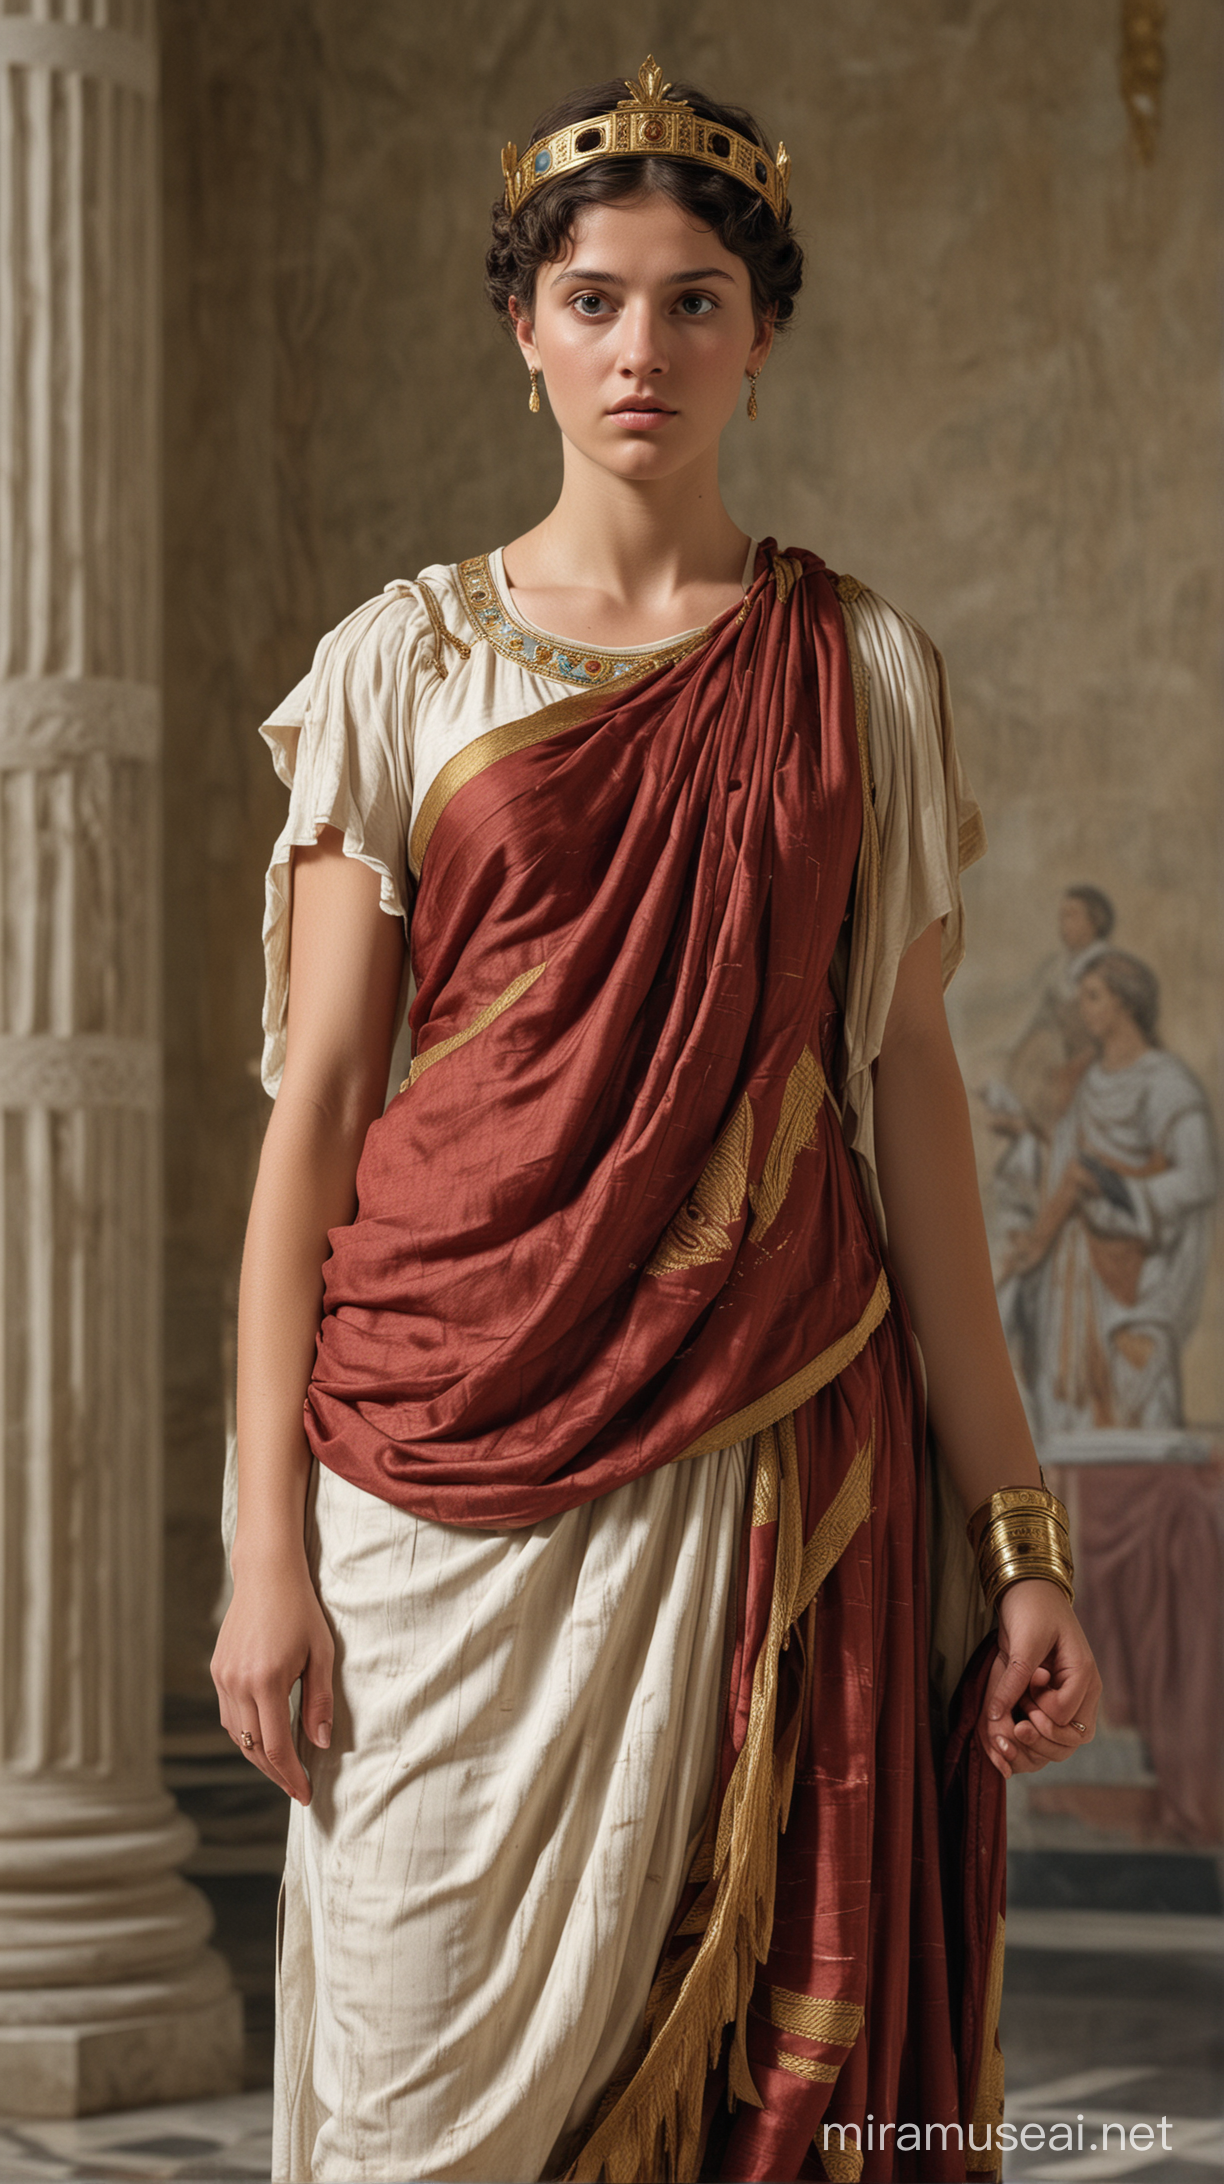 Visualize (((Julia, a young woman dressed in regal attire))), standing with a ((guilty expression)) before (((Emperor Augustus)))